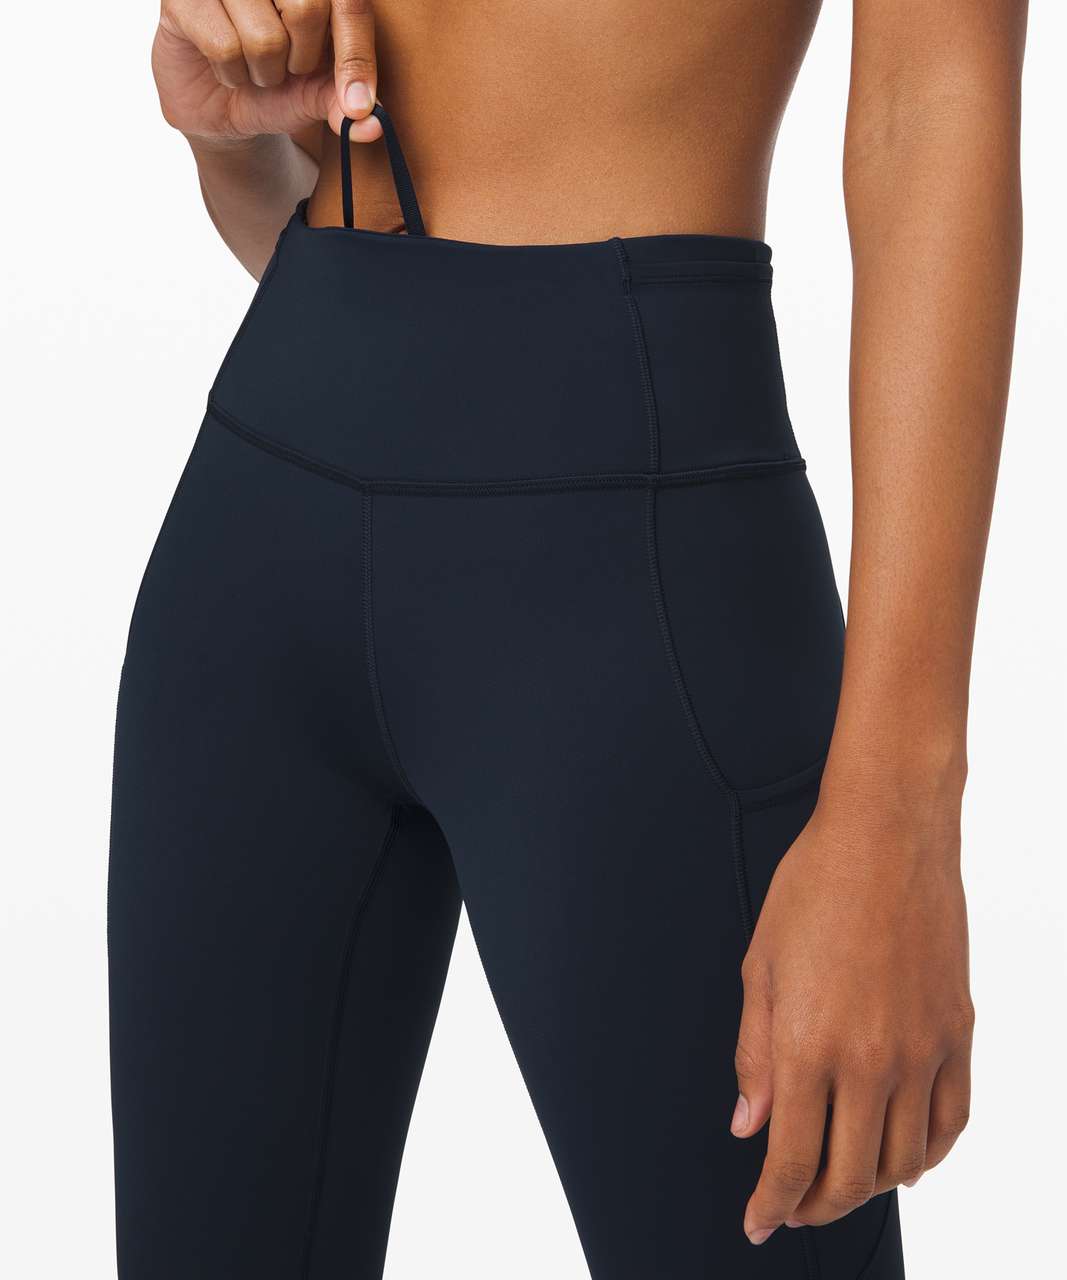 Lululemon Fast and Free Crop II 19" *Non-Reflective - True Navy